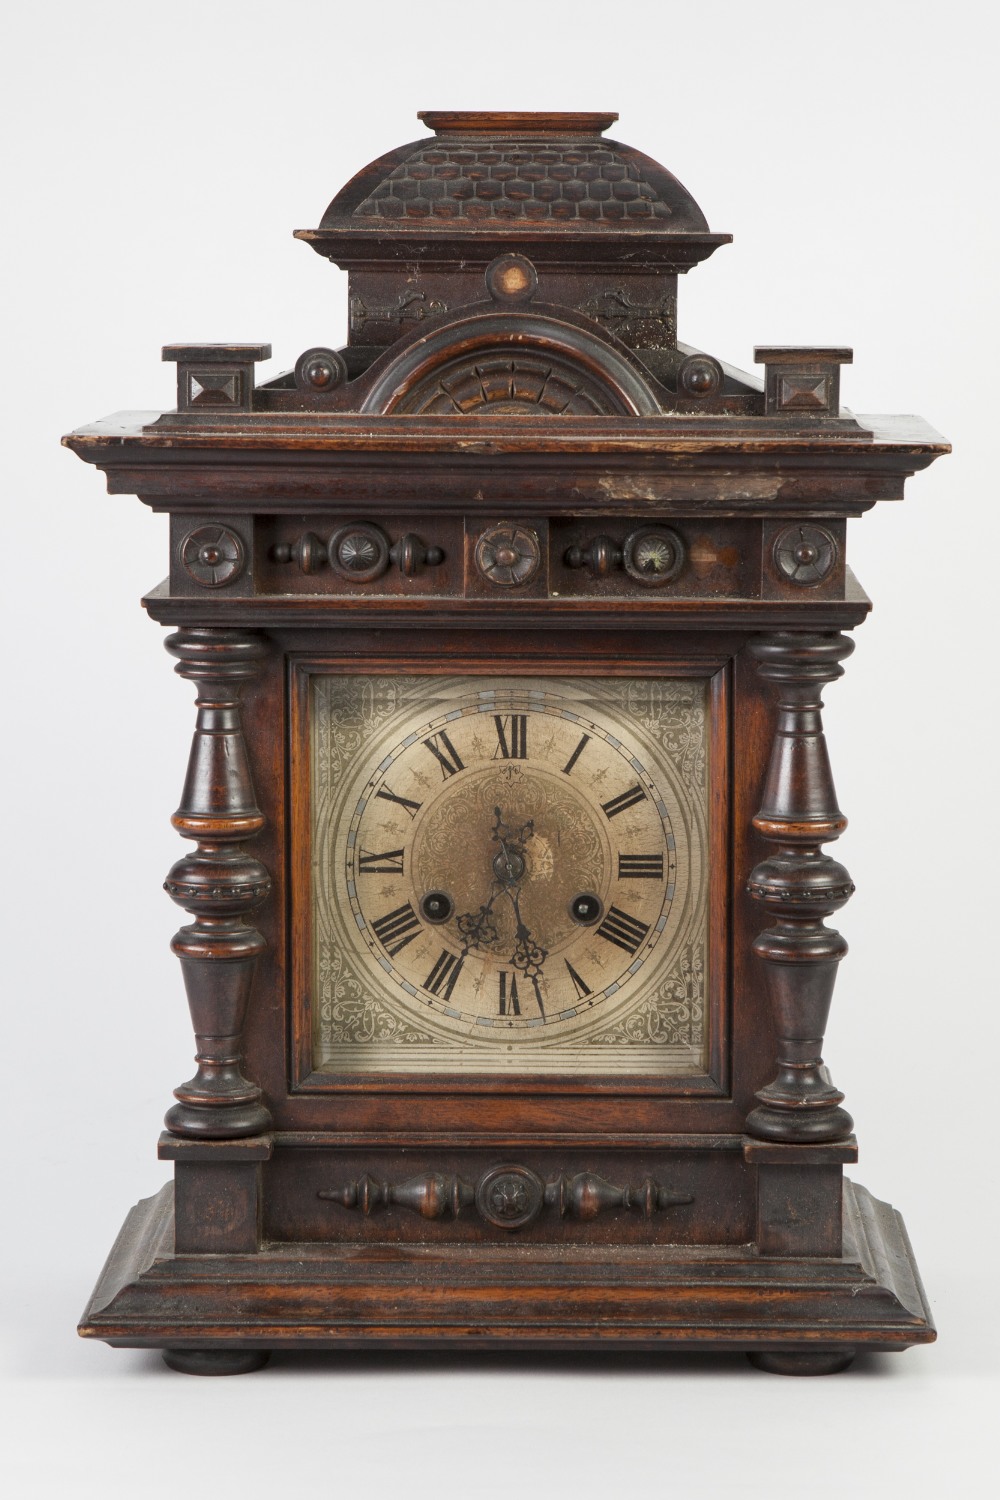 LATE 19th CENTURY GERMAN WALNUT CASED MANTEL CLOCK with Jungmans movement striking on a coiled gong